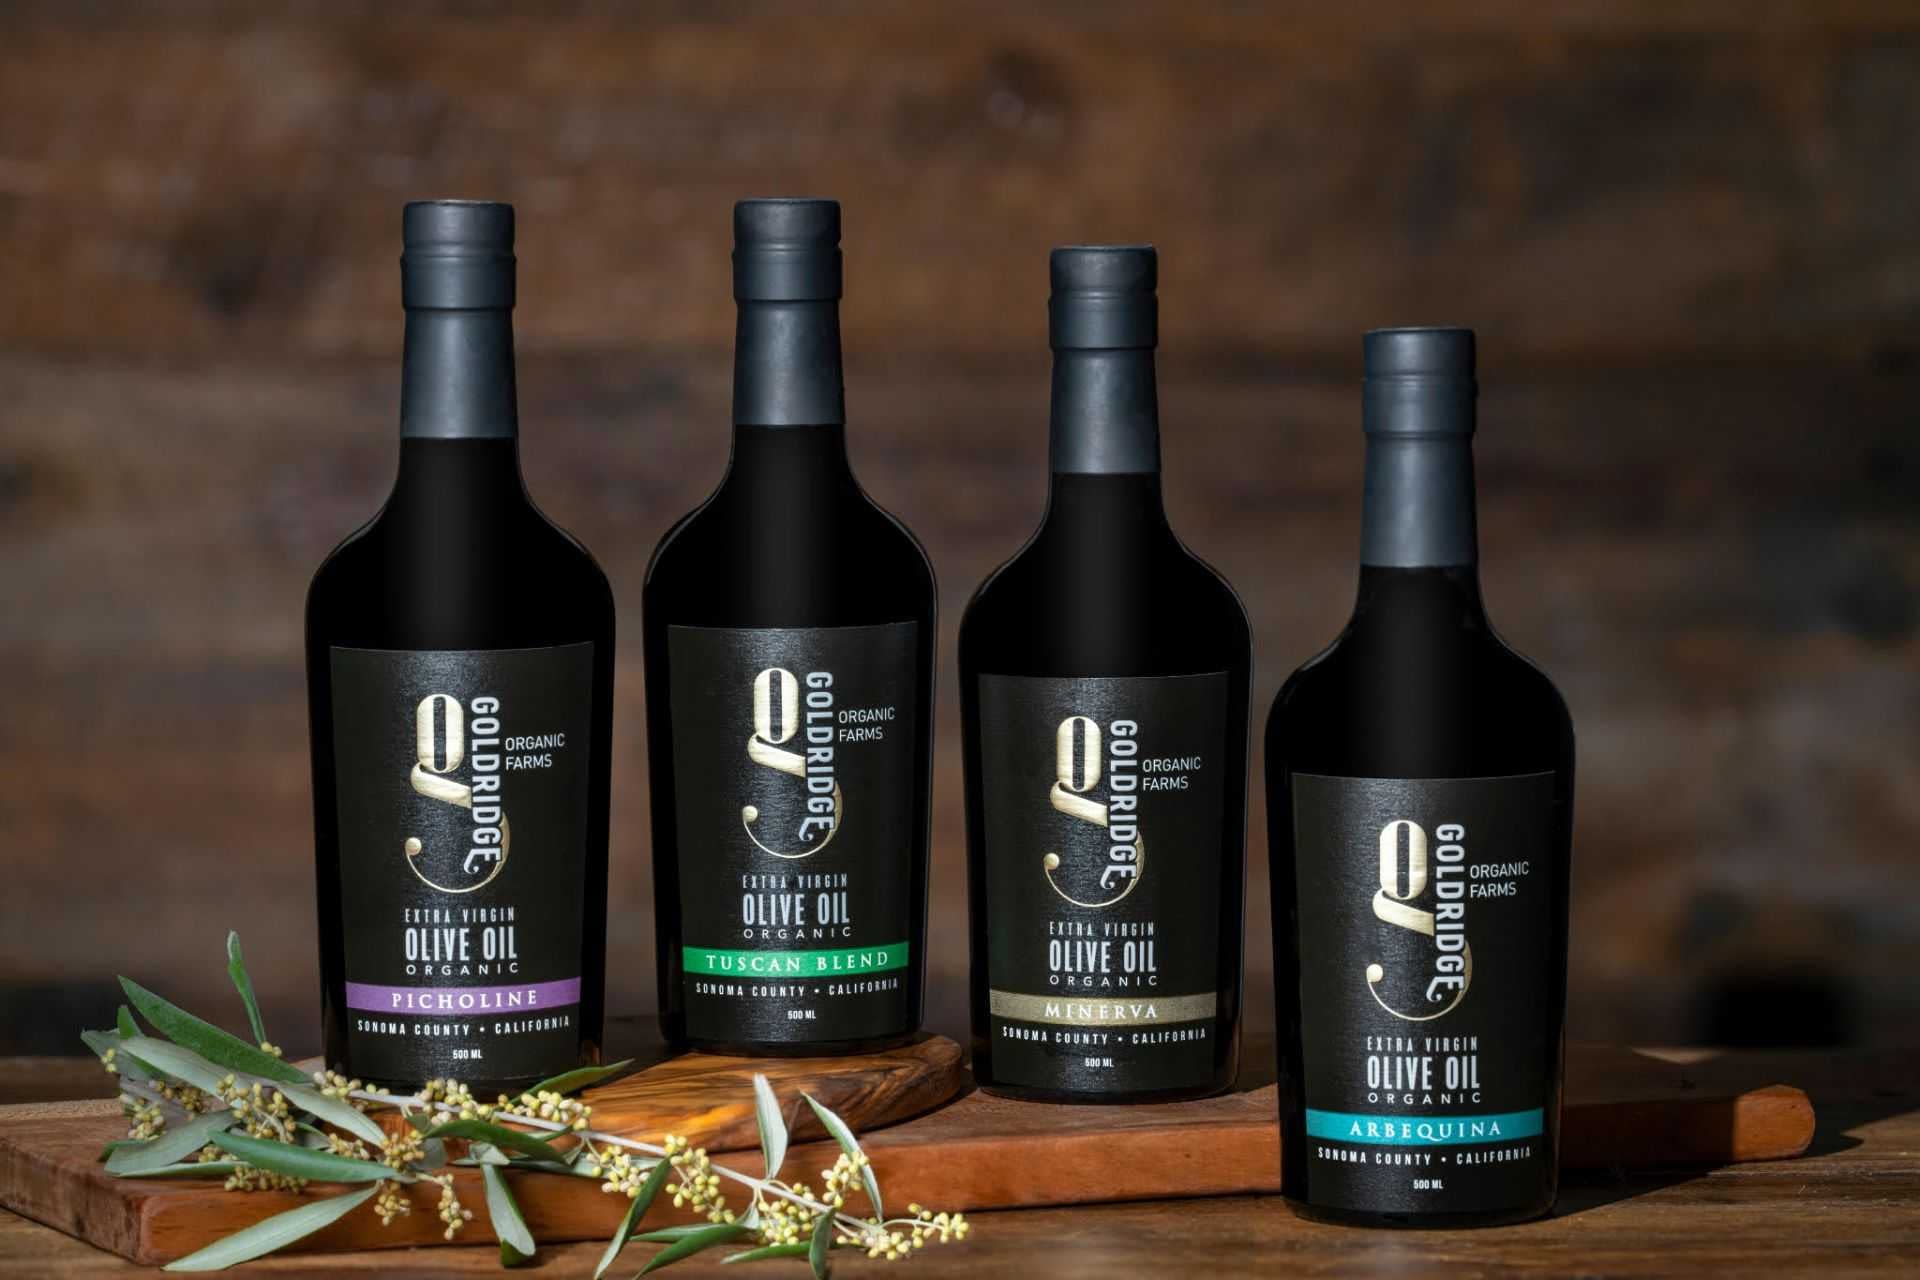 north-america-profiles-production-the-best-olive-oils-world-sustainable-organic-production-helps-one-california-producer-standout-olive-oil-times